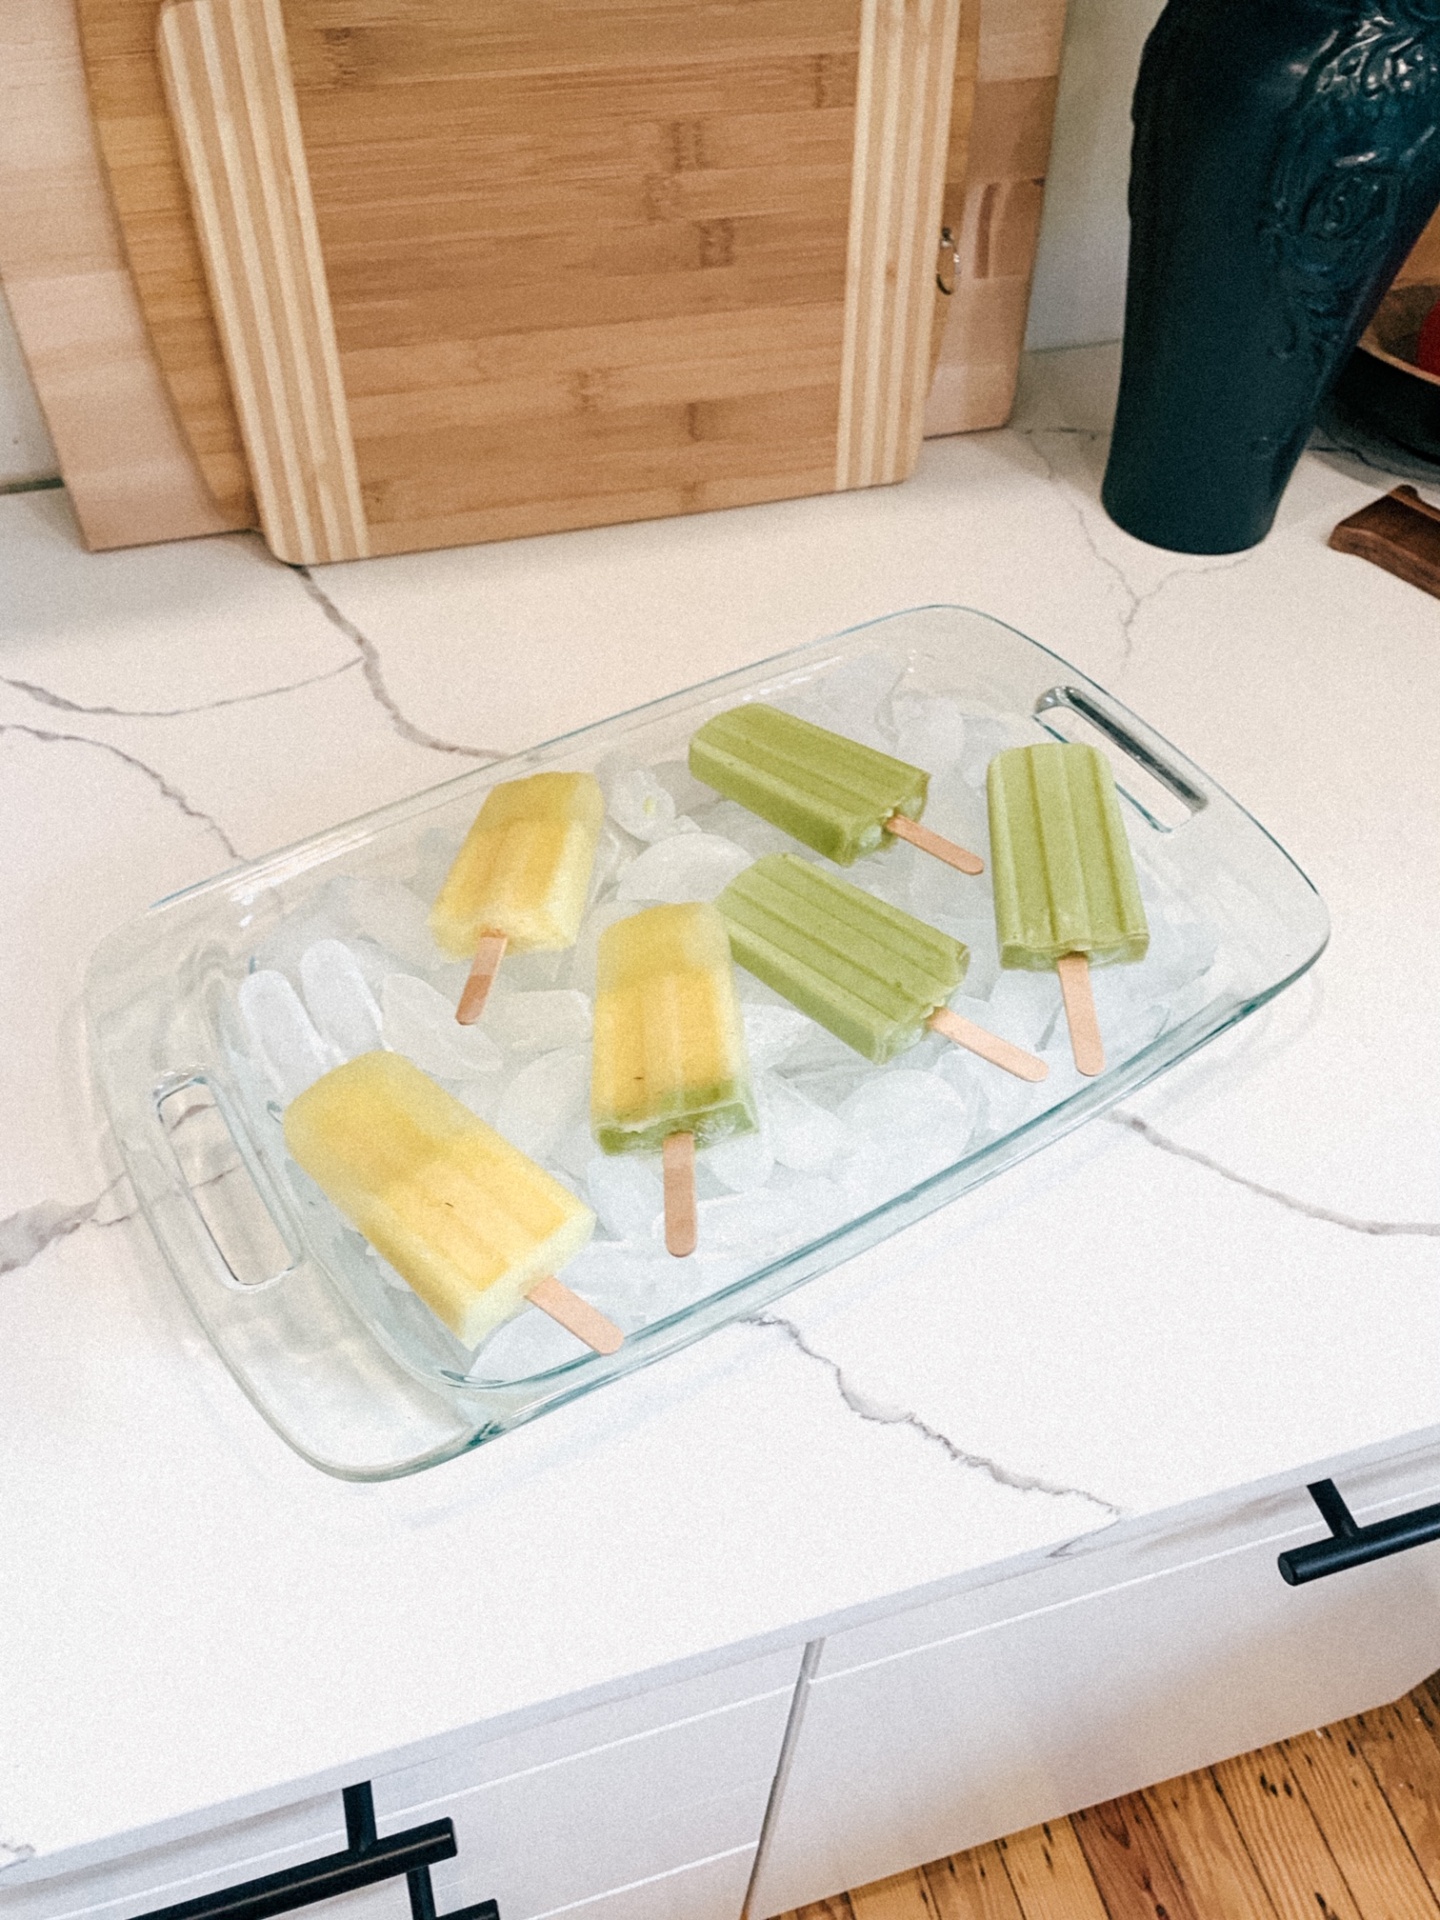 Coconut Avocado Ice Pops and Pineapple Ginger Ice Pops Recipe - Simone Piliero Arena - Simply by Simone - Westchester County Blogger - Close up #recipe #icepops #desserts #summerrecipe #howto #makeicepops